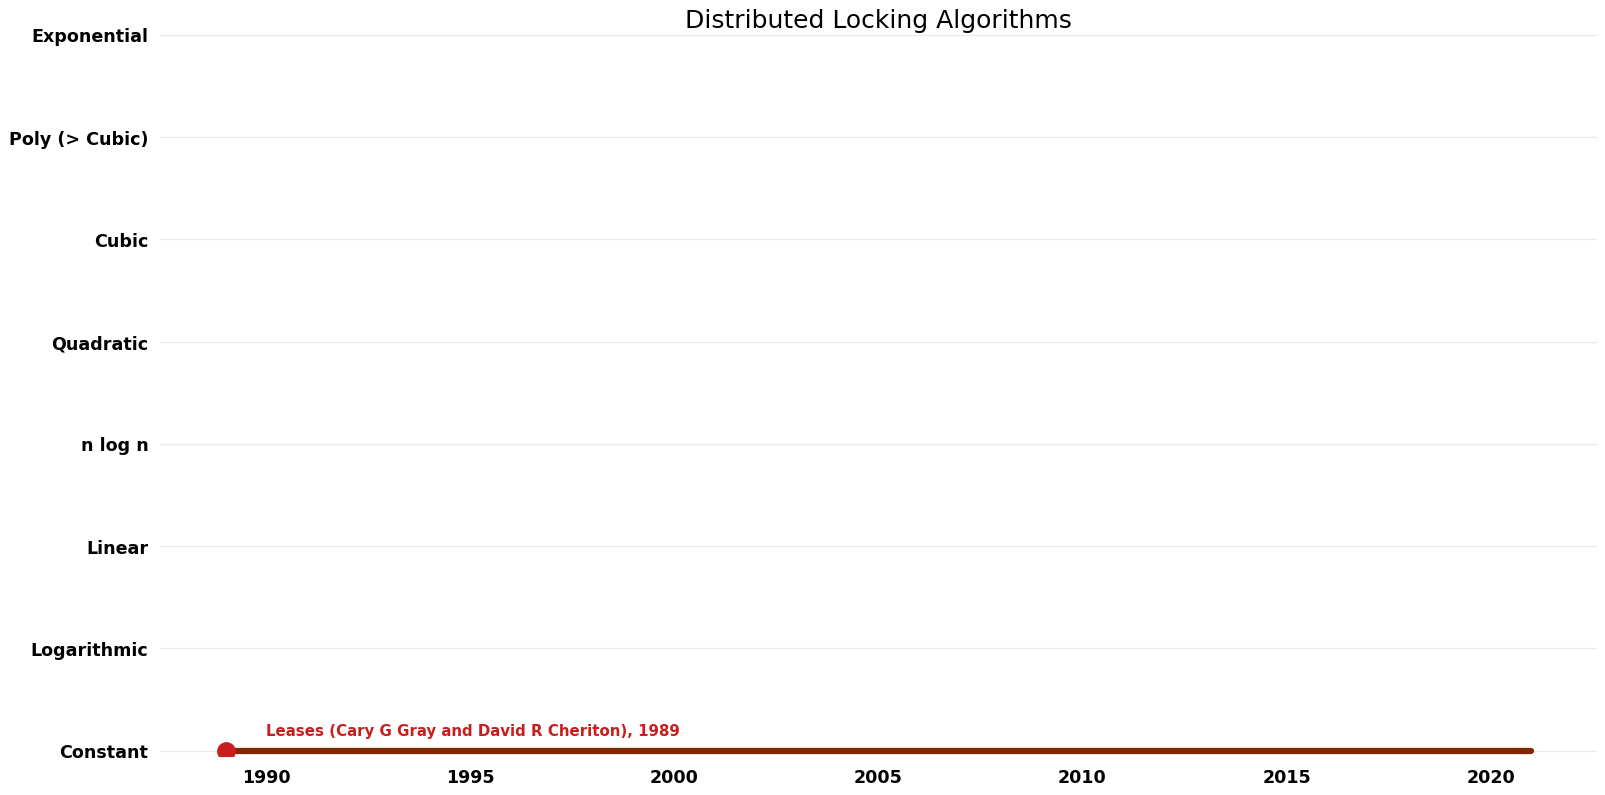 File:Distributed Locking Algorithms - Space.png